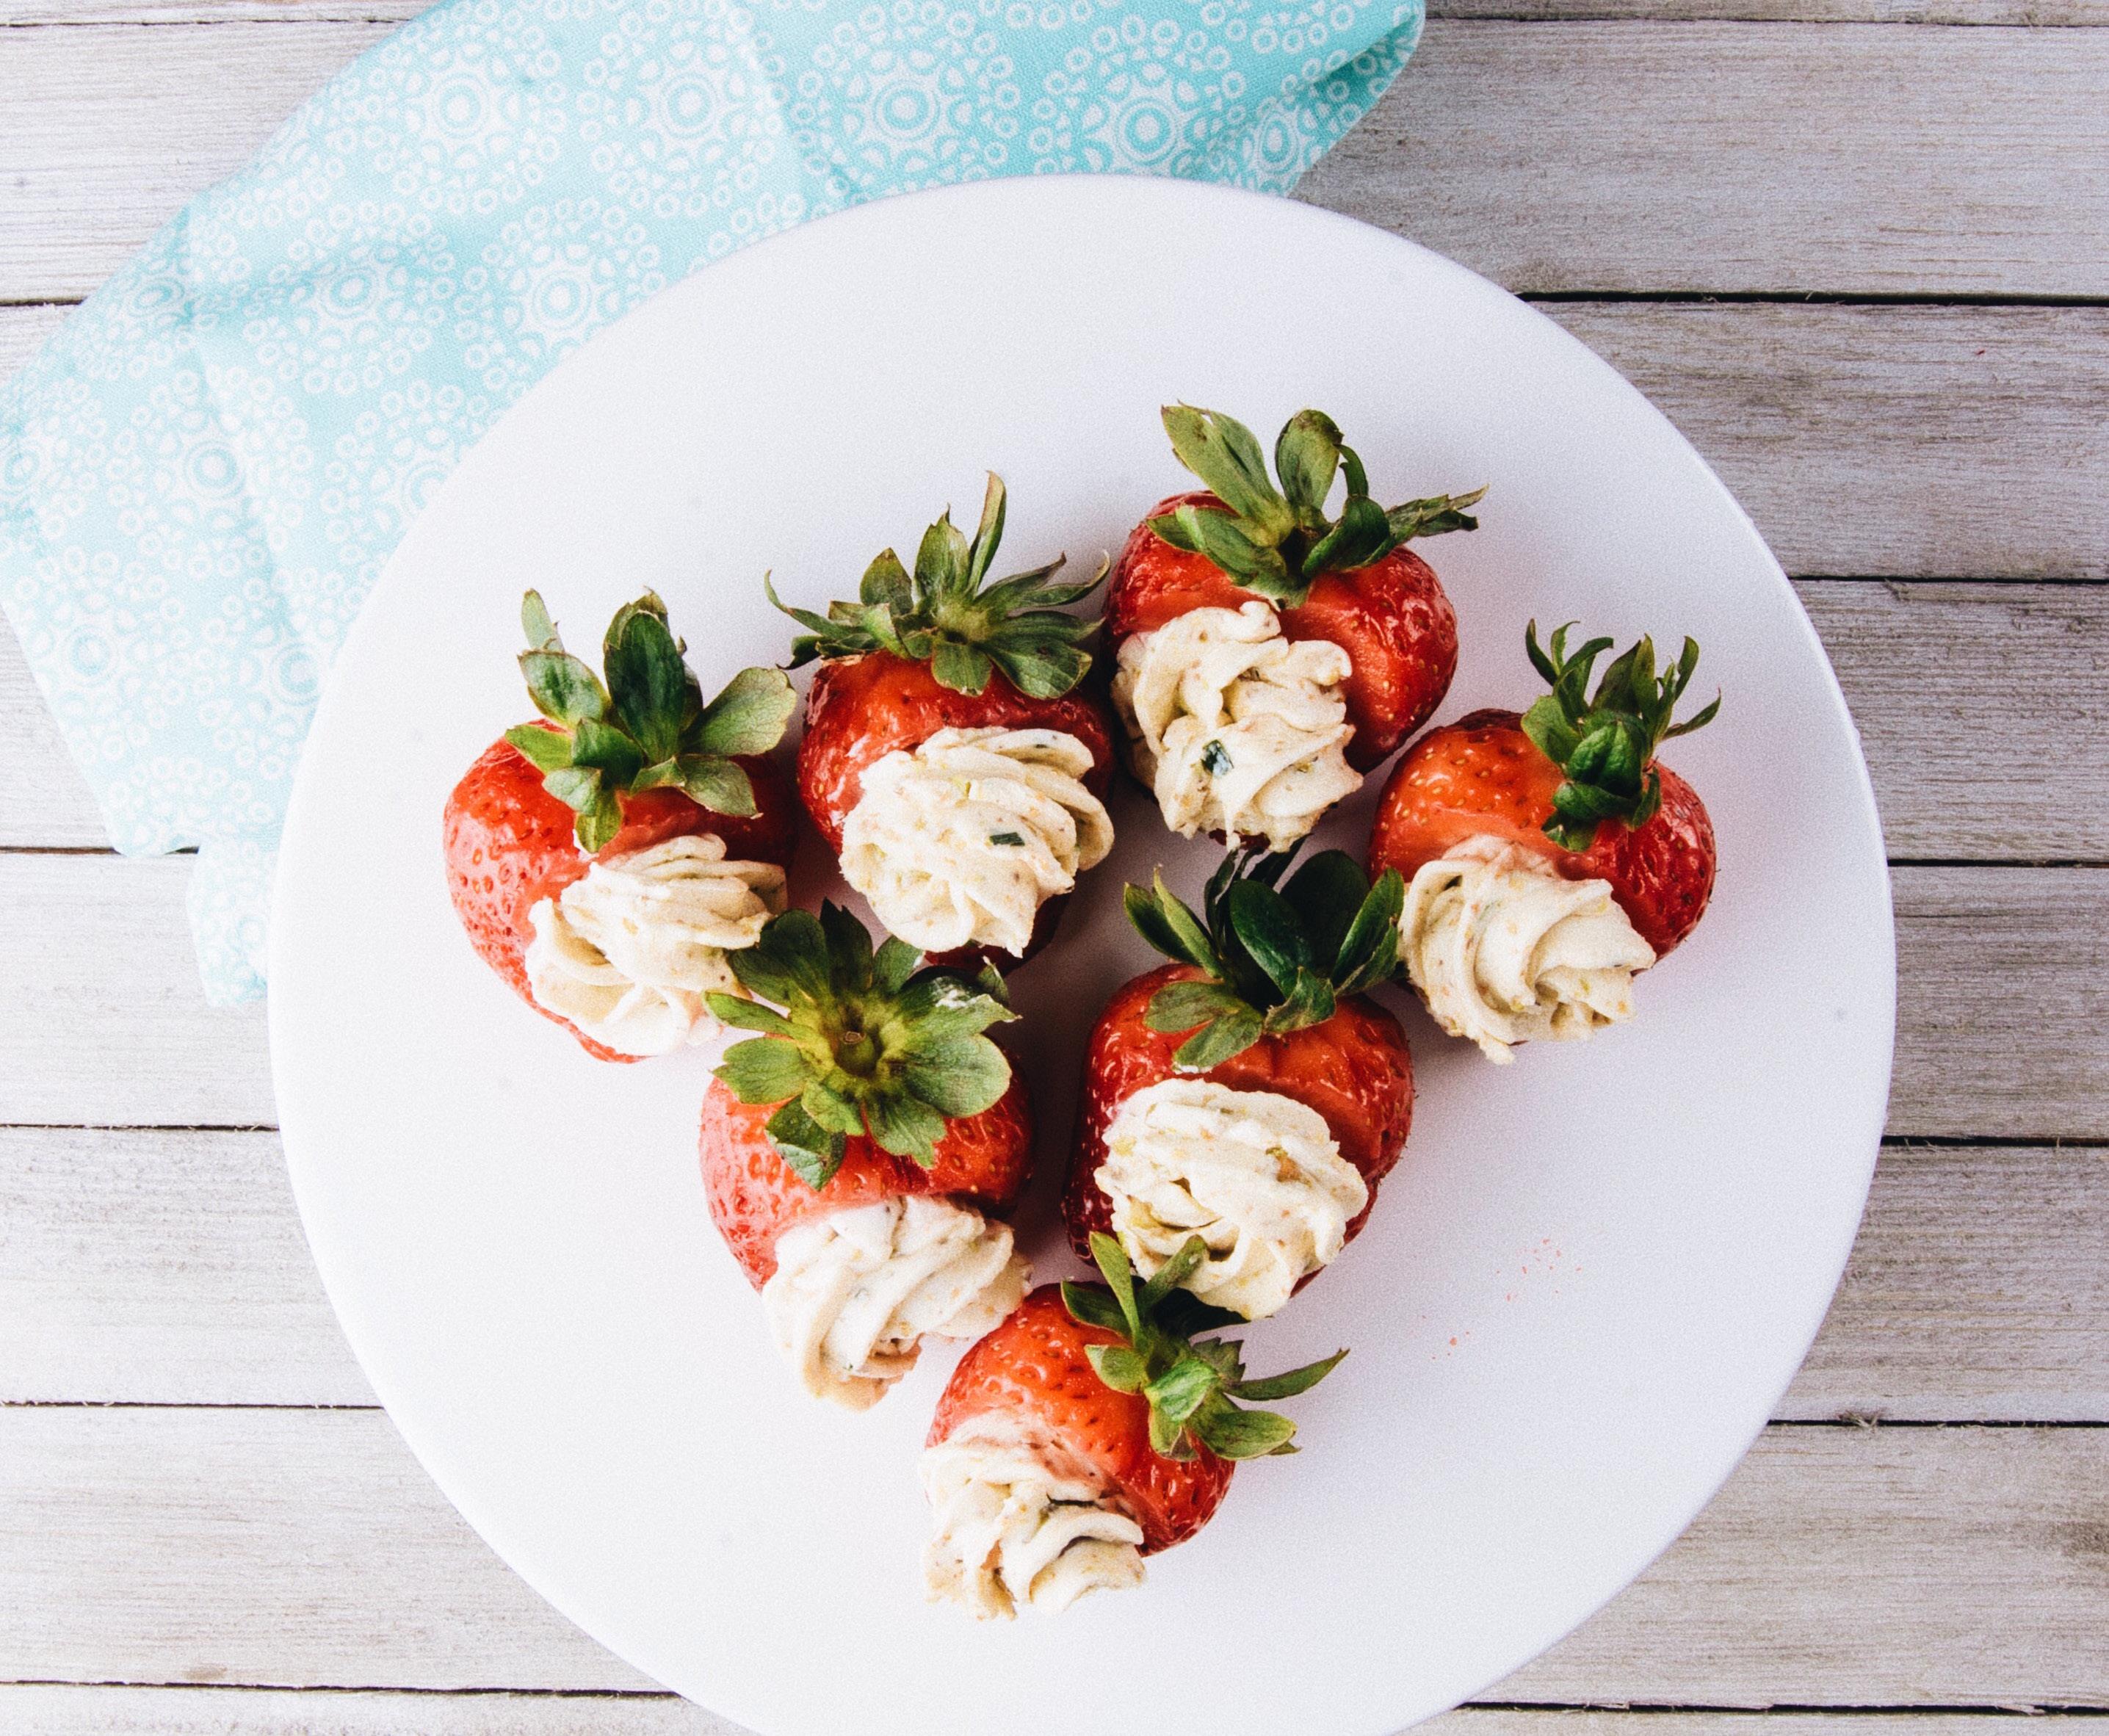 strawberries stuffed with cheese arranged neatly on a white plate